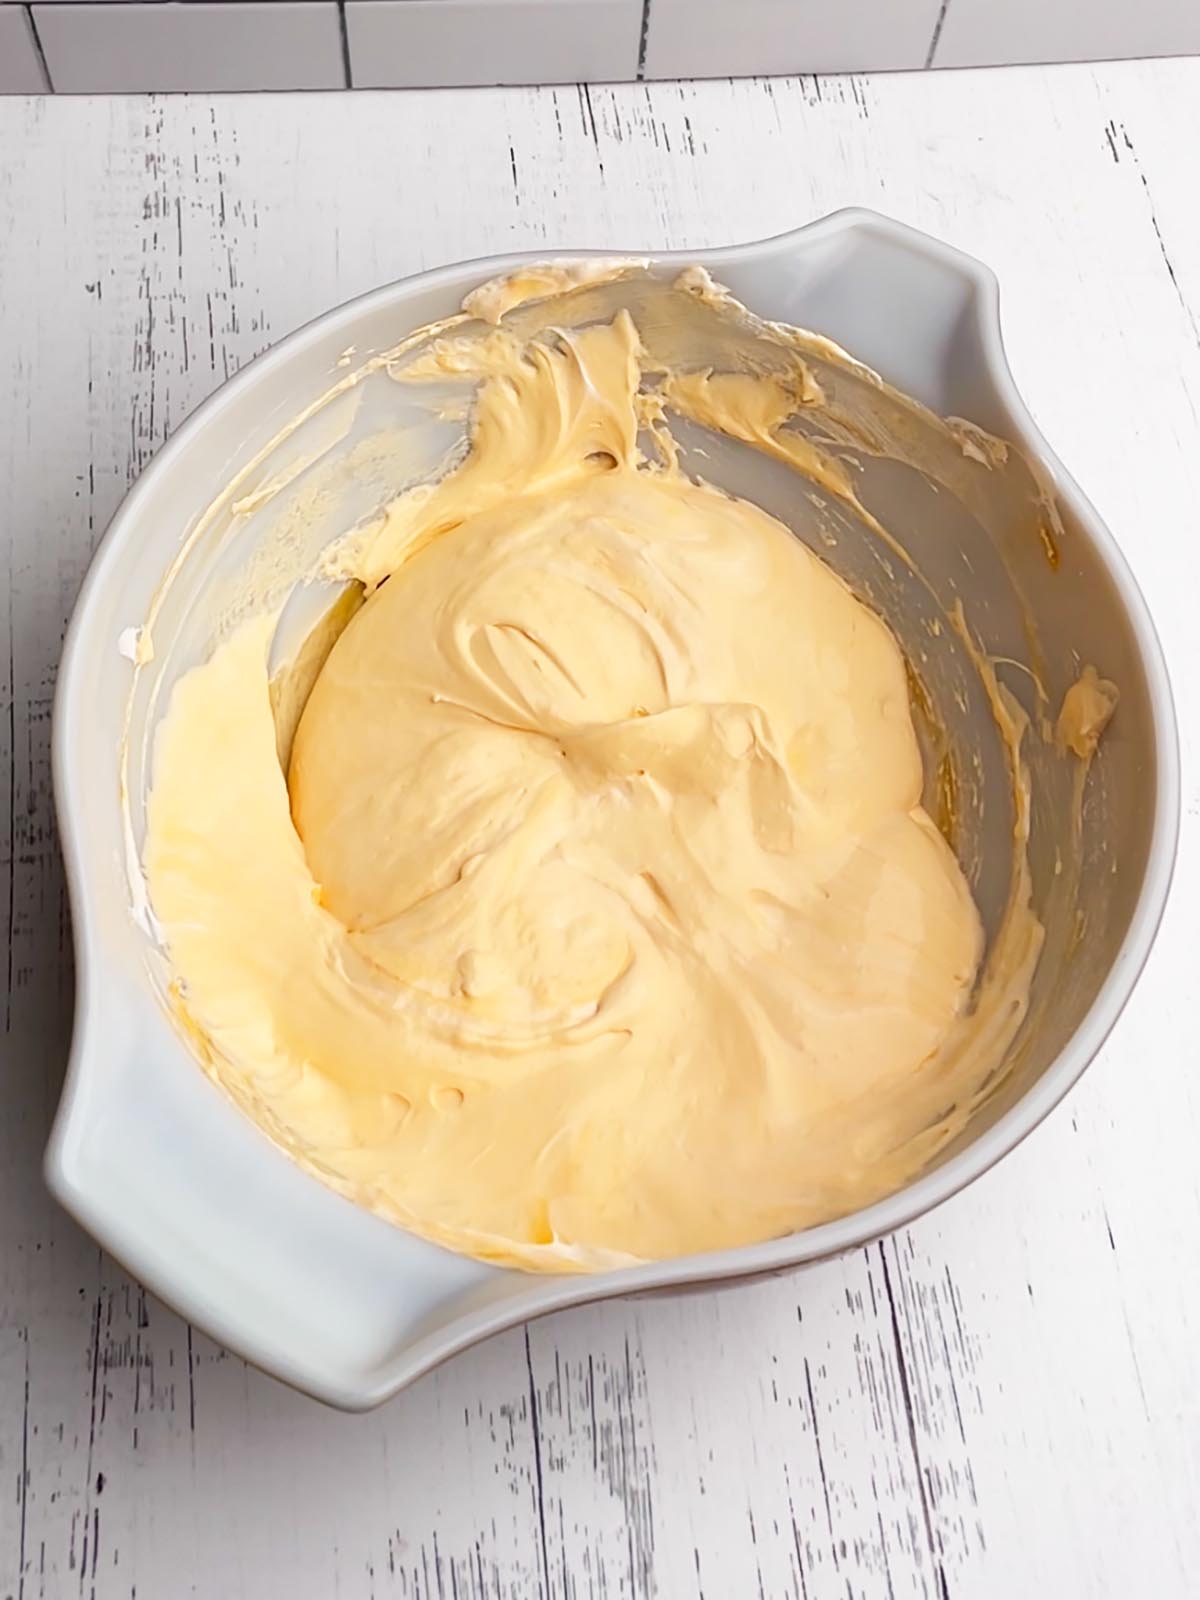 orange pudding and cool whip mixture in a white mixing bowl